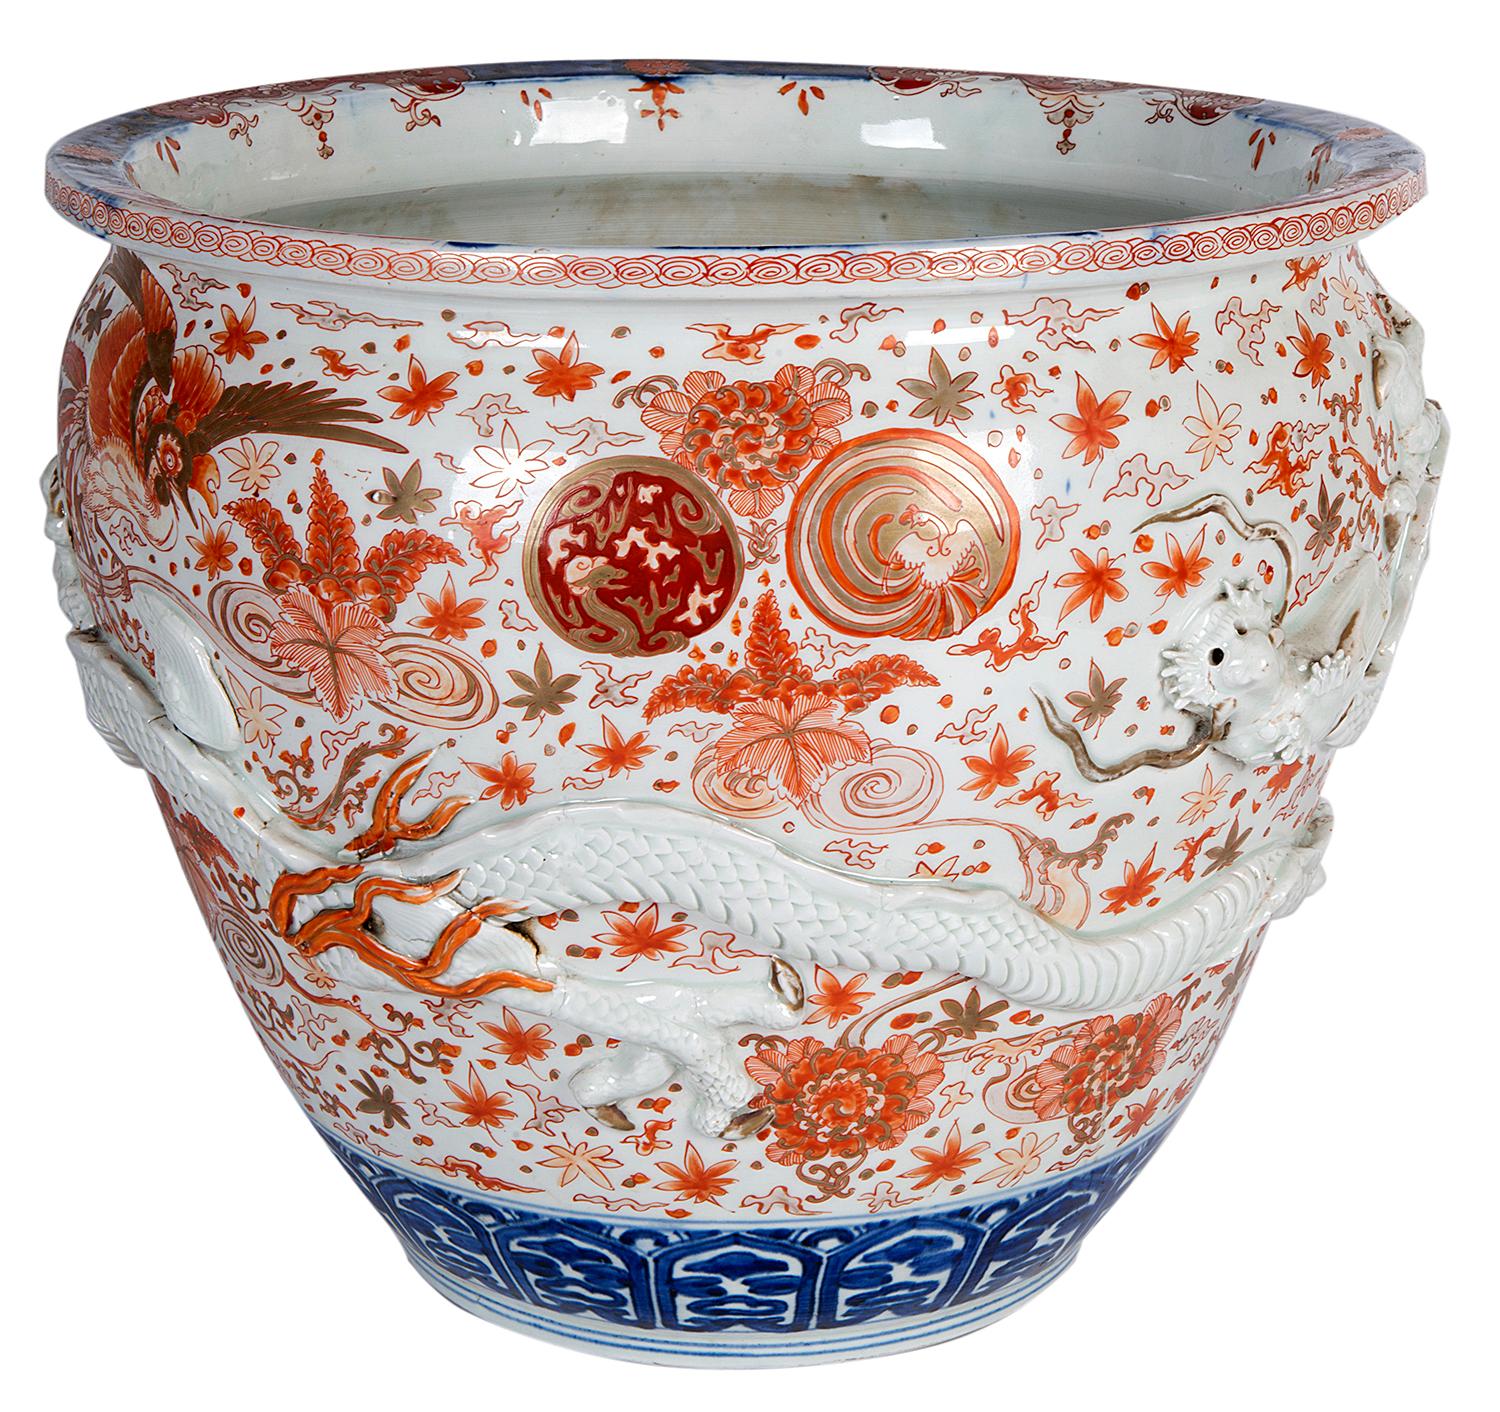 A very impressive, good quality 19th century Japanese Imari jardinière, having wonderful painted decoration of flowers, exotic birds and foliage, a mythical dragon in releaf wraps around the body.